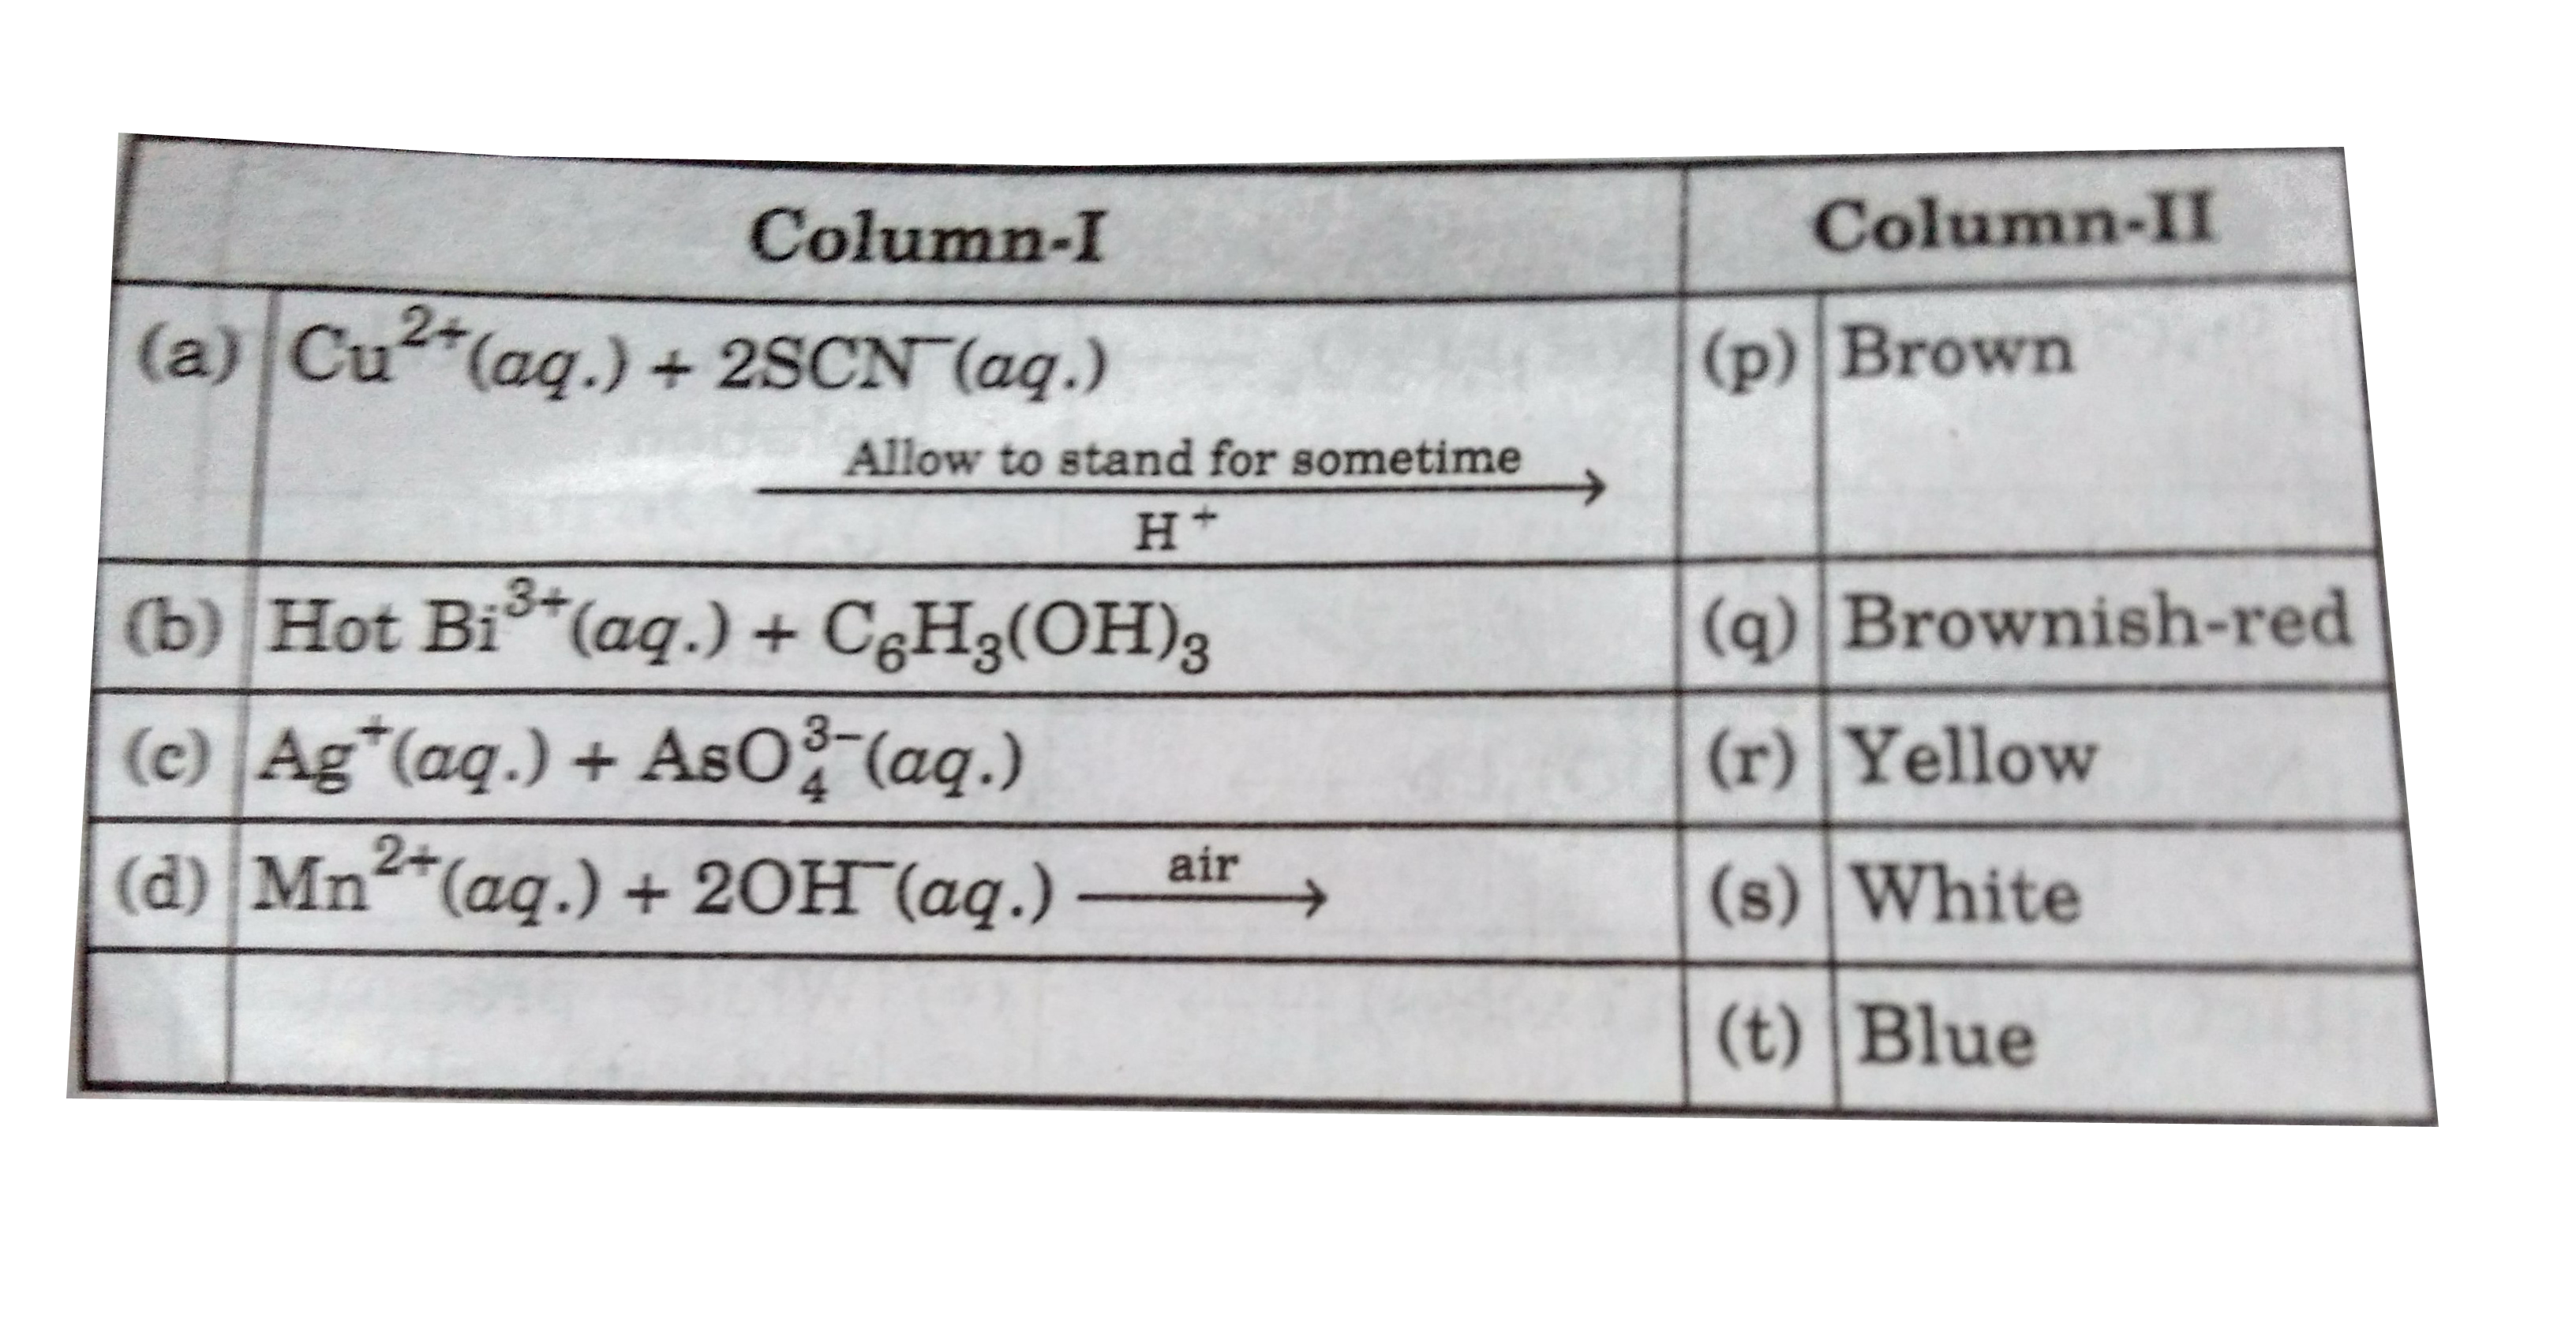 Match the reactions listed in column-I with the colour of the the reaction precipitates listed in column-II.